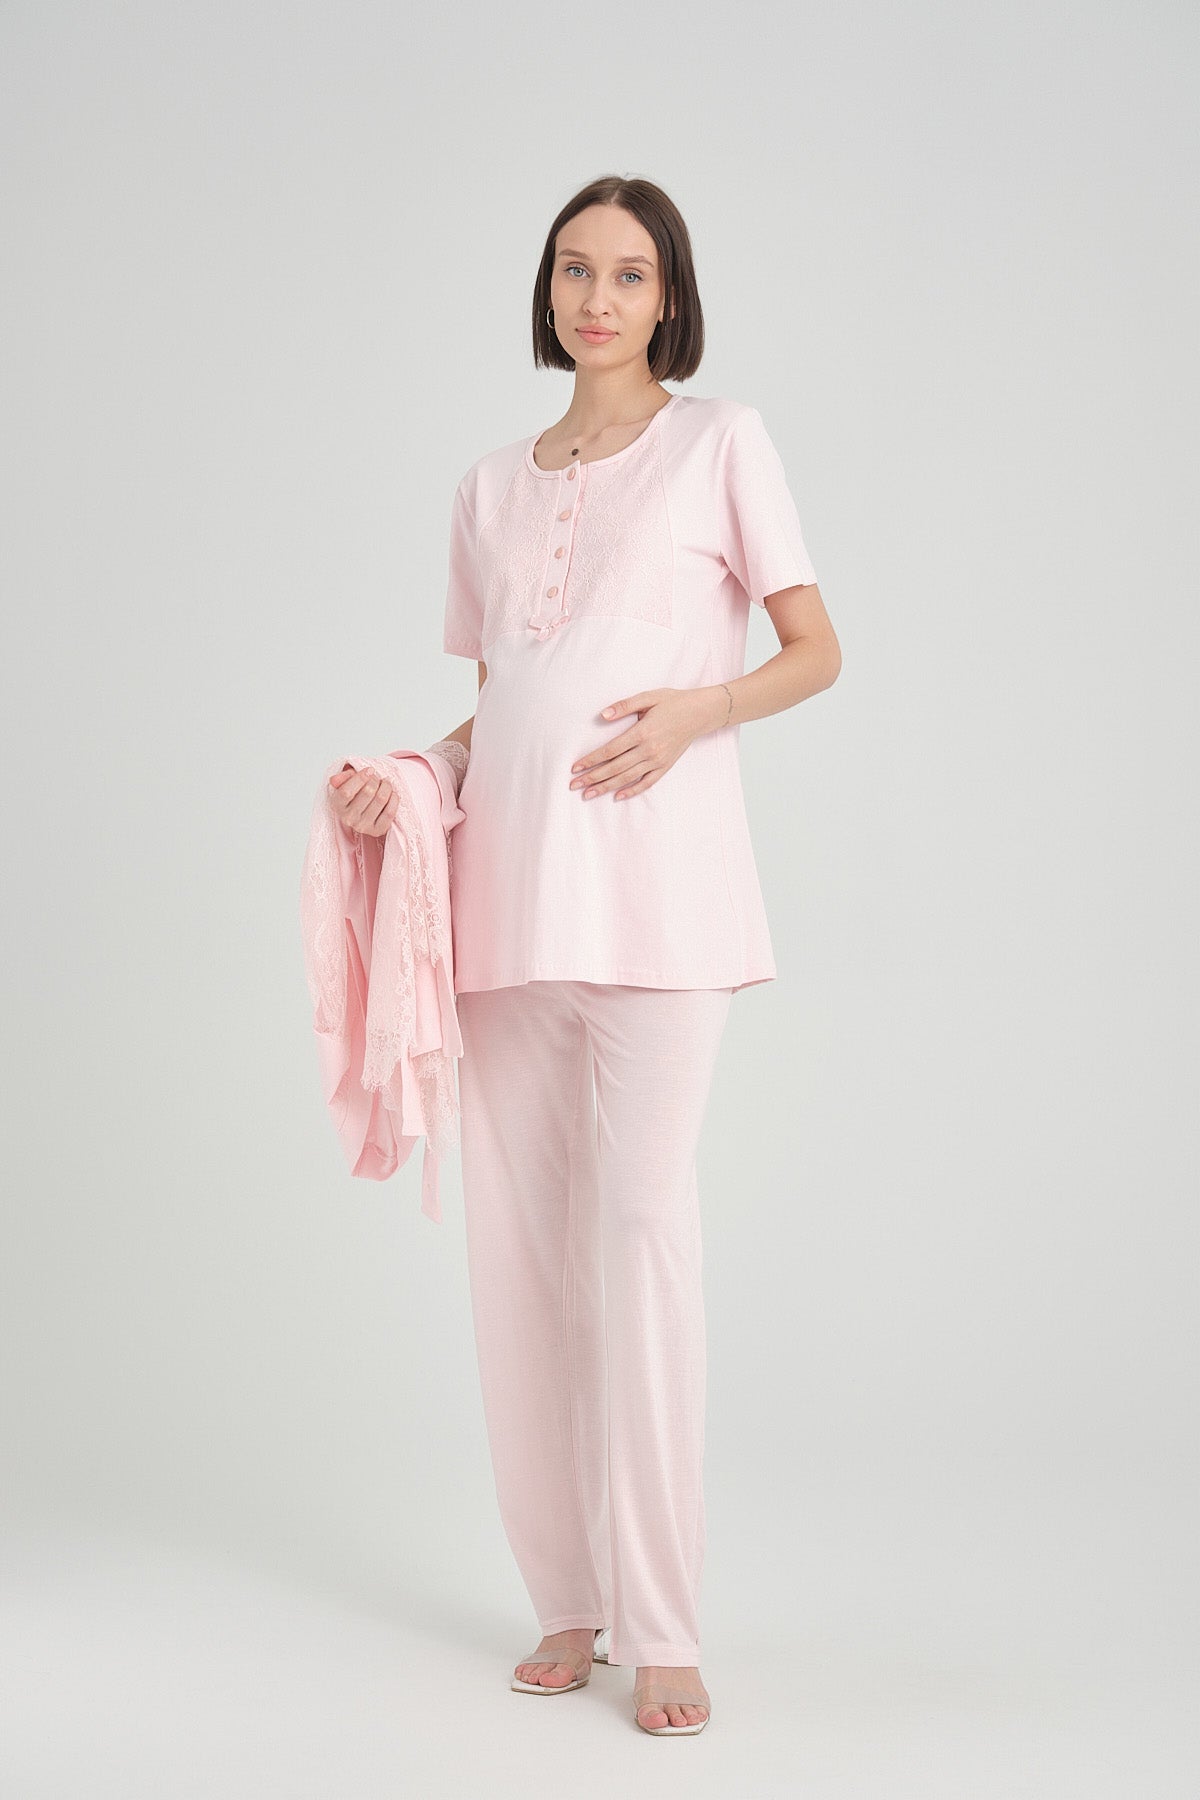 Shopymommy 2370 Lace Detailed 3-Pieces Maternity & Nursing Pajamas With Robe Pink